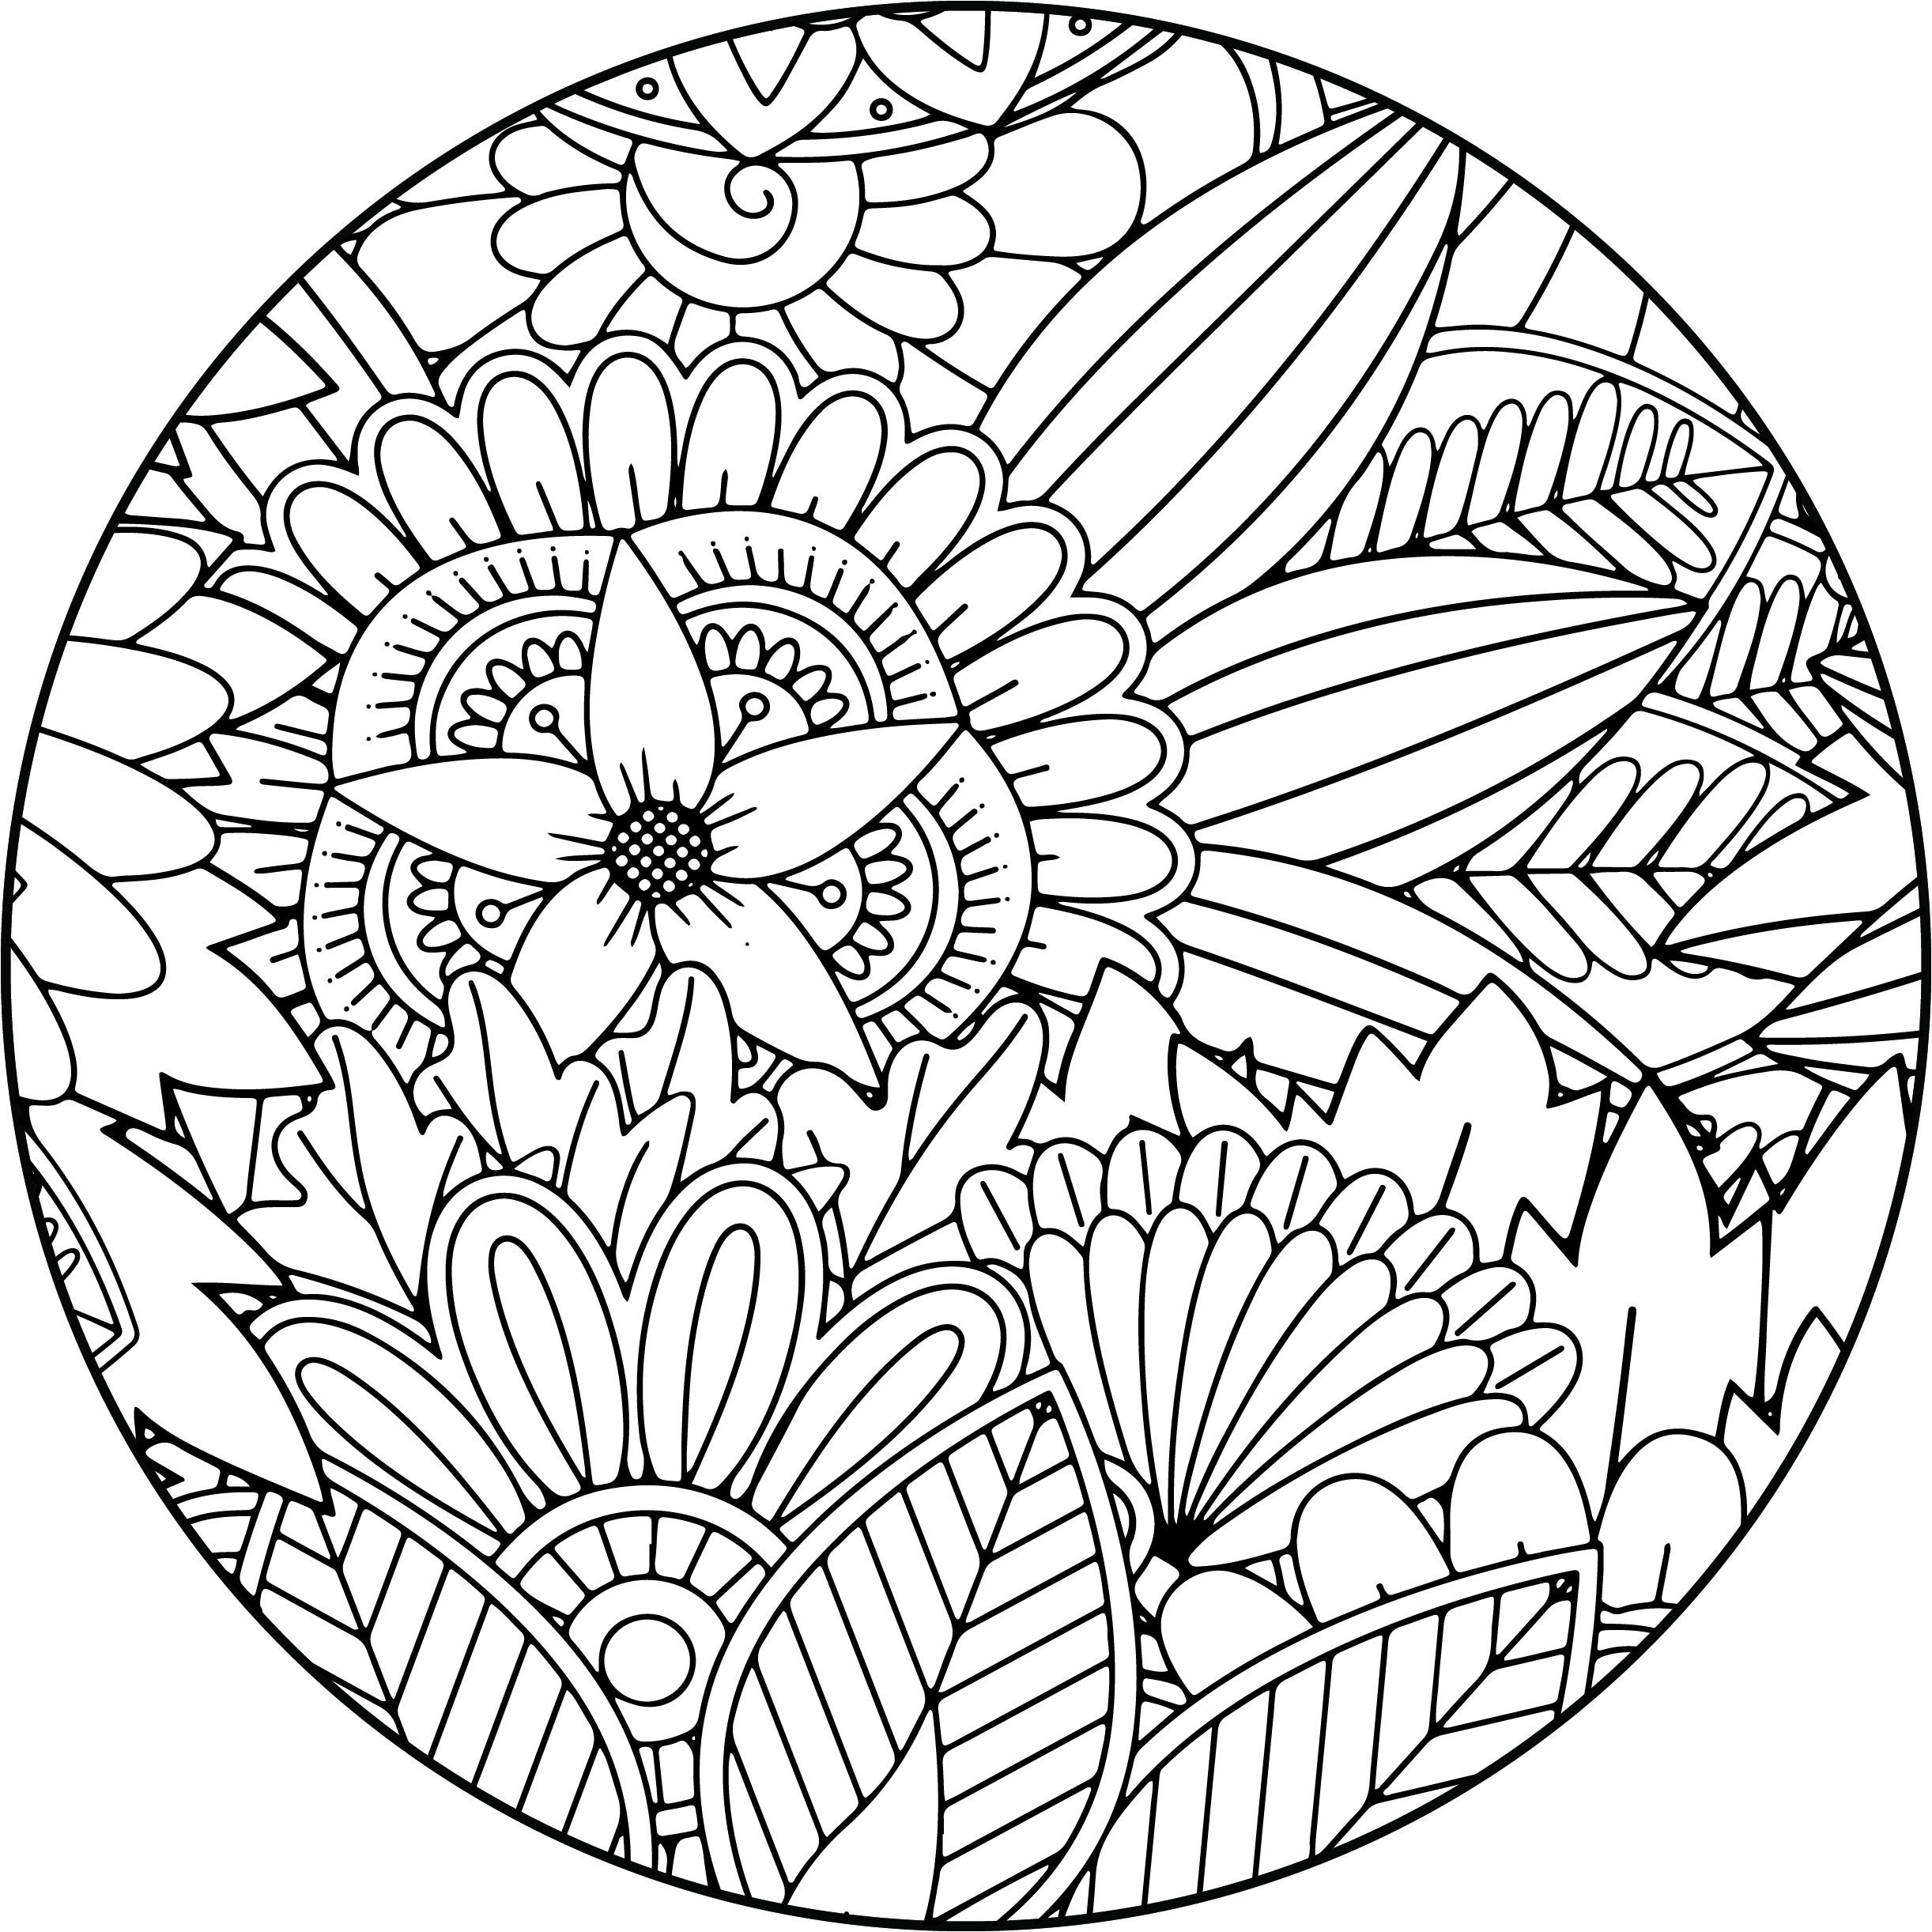 Circle adult coloring pages printable coloring coloring book activity book stress relief coloring download kids coloring activity